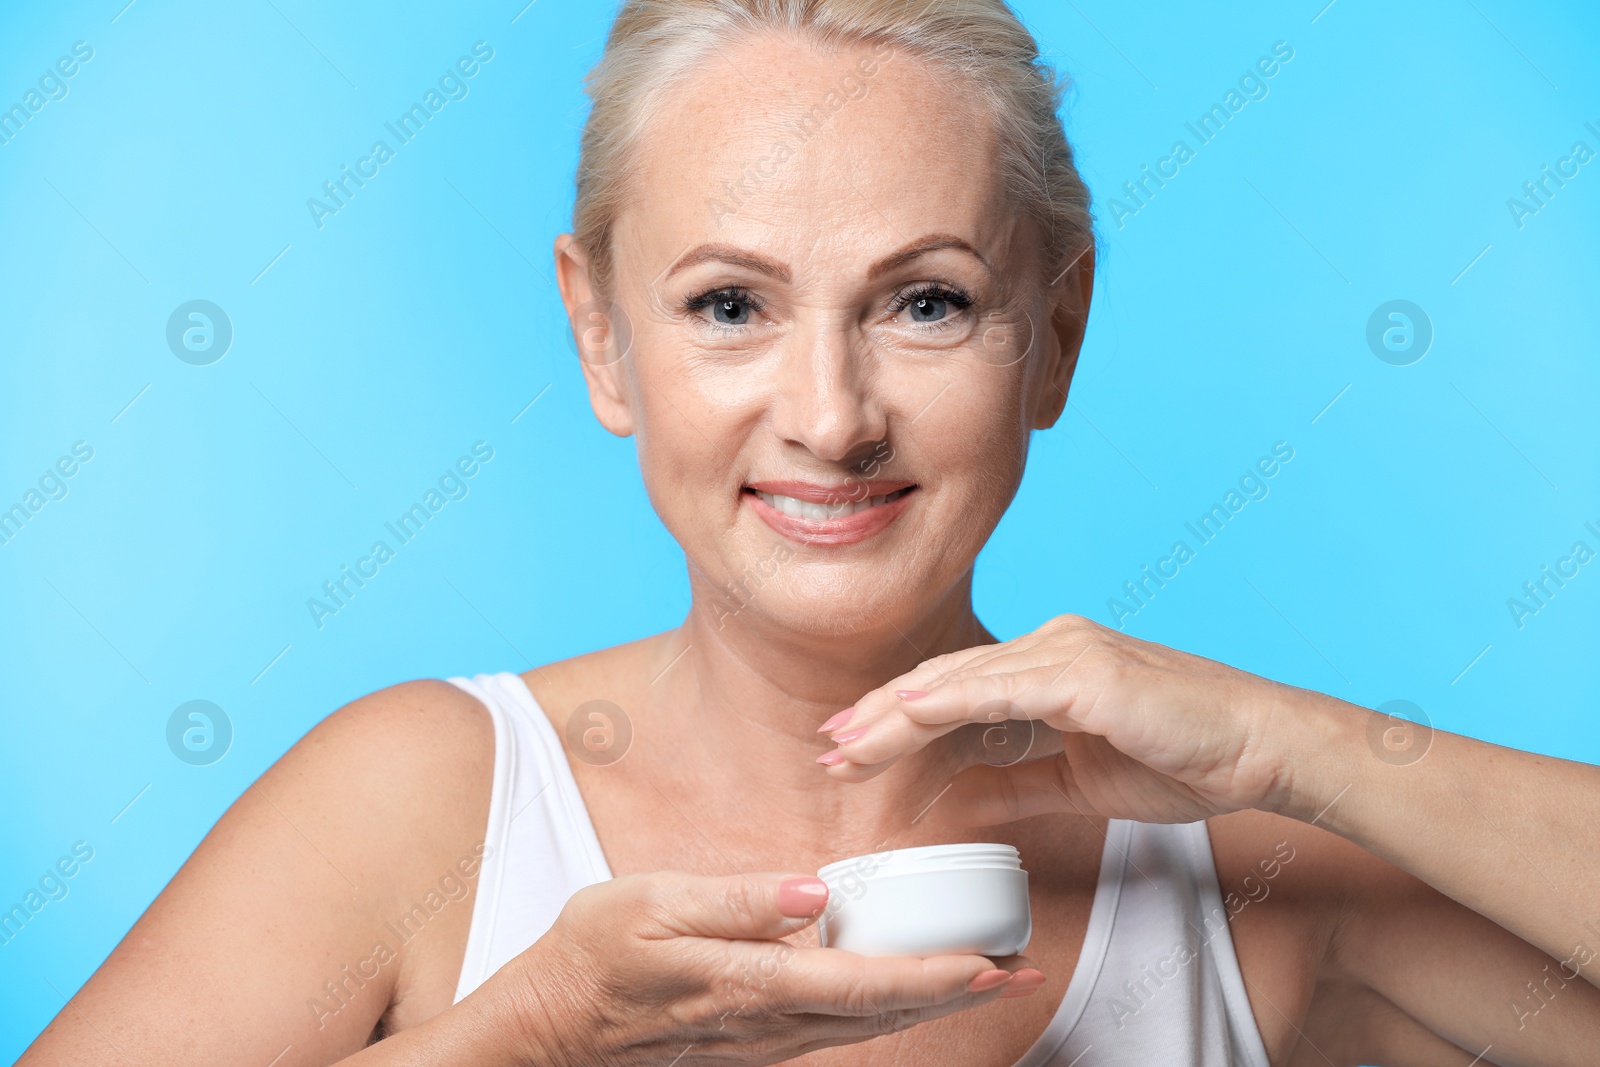 Photo of Portrait of beautiful mature woman with perfect skin holding jar of cream on light blue background